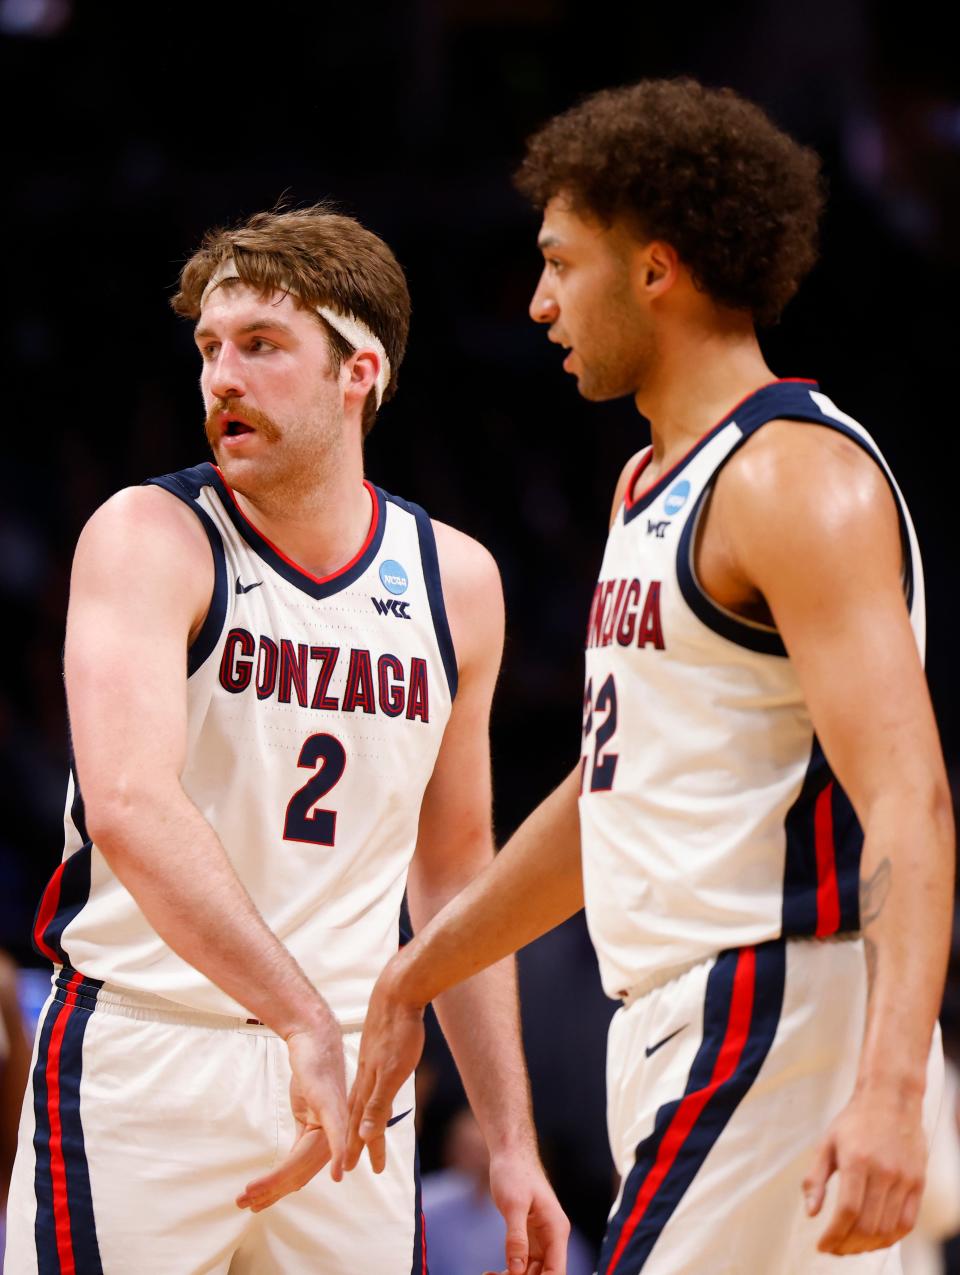 Gonzaga Bulldogs forward Drew Timme (2) and forward Anton Watson (22) celebrate after a play during the first half against the Grand Canyon Antelopes at Ball Arena in Denver on March 17, 2023.